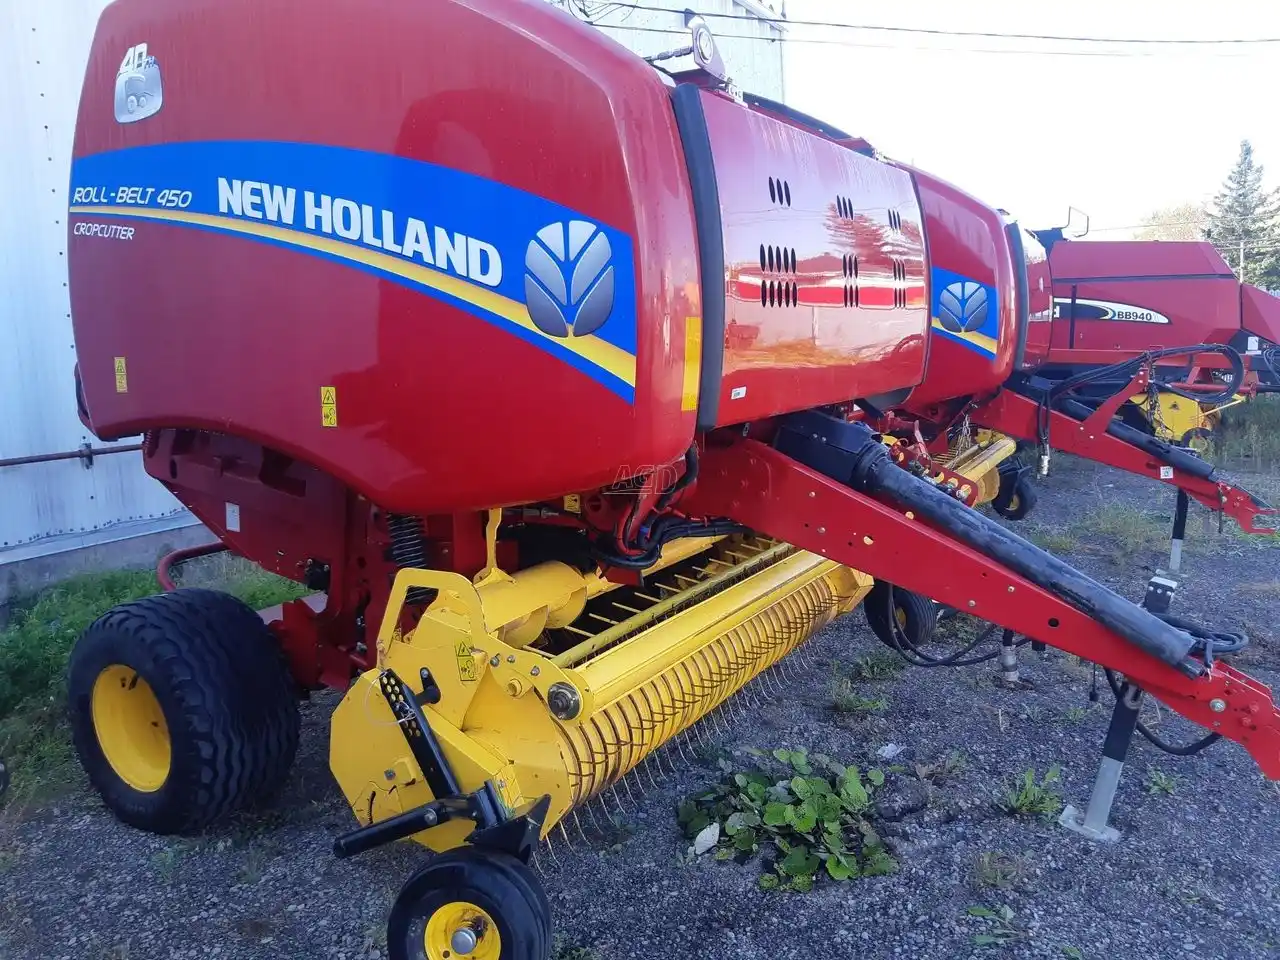 New Holland Farm Equipment for sale from Avantis Cooperative